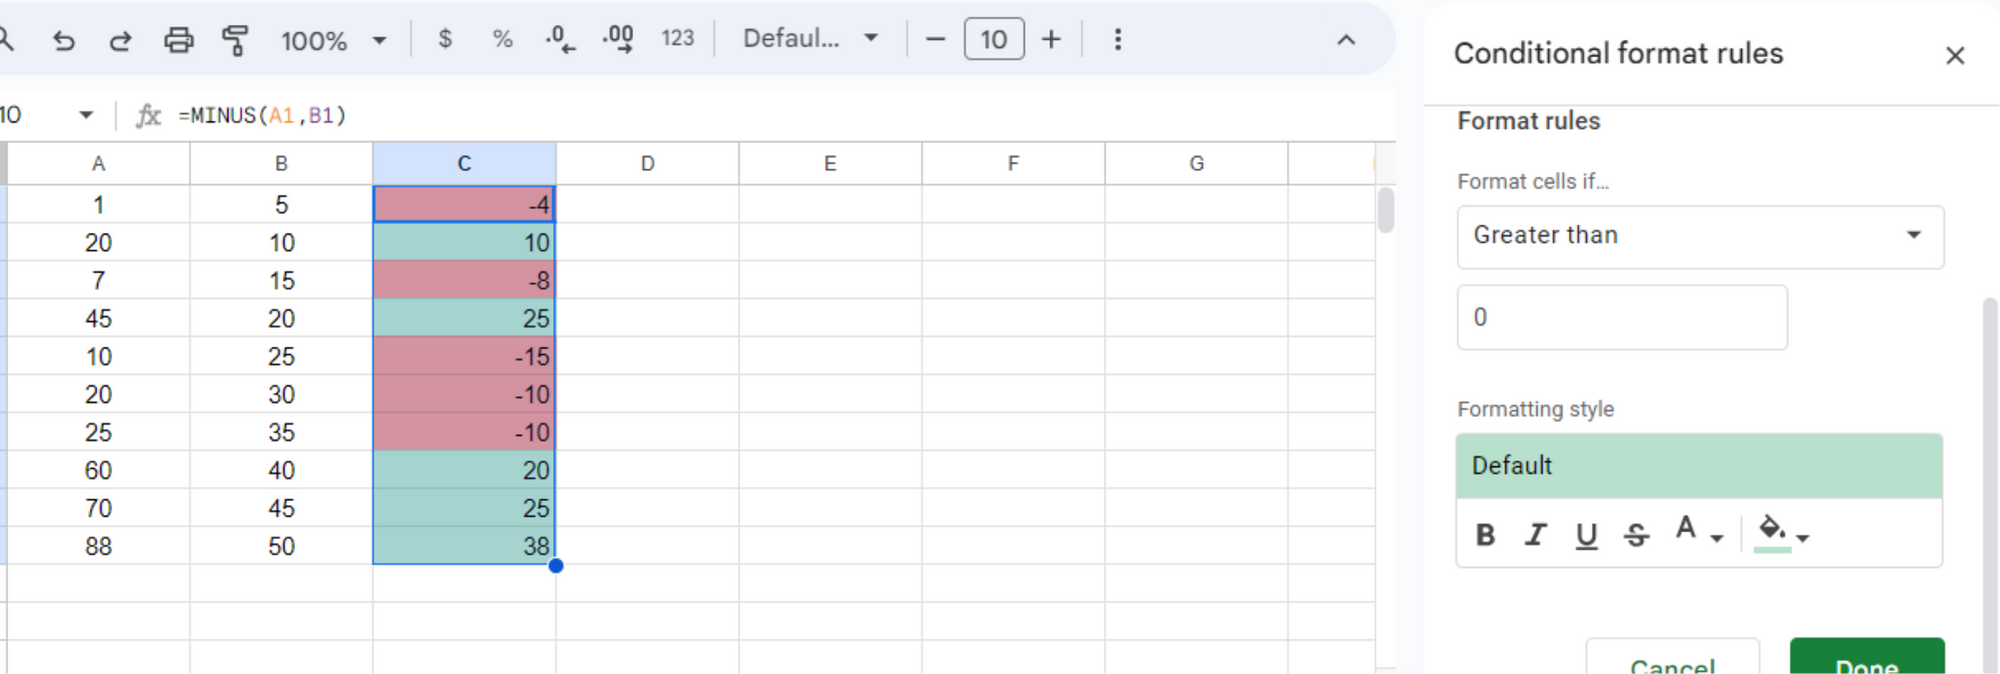 Combining minus function and conditional formatting 